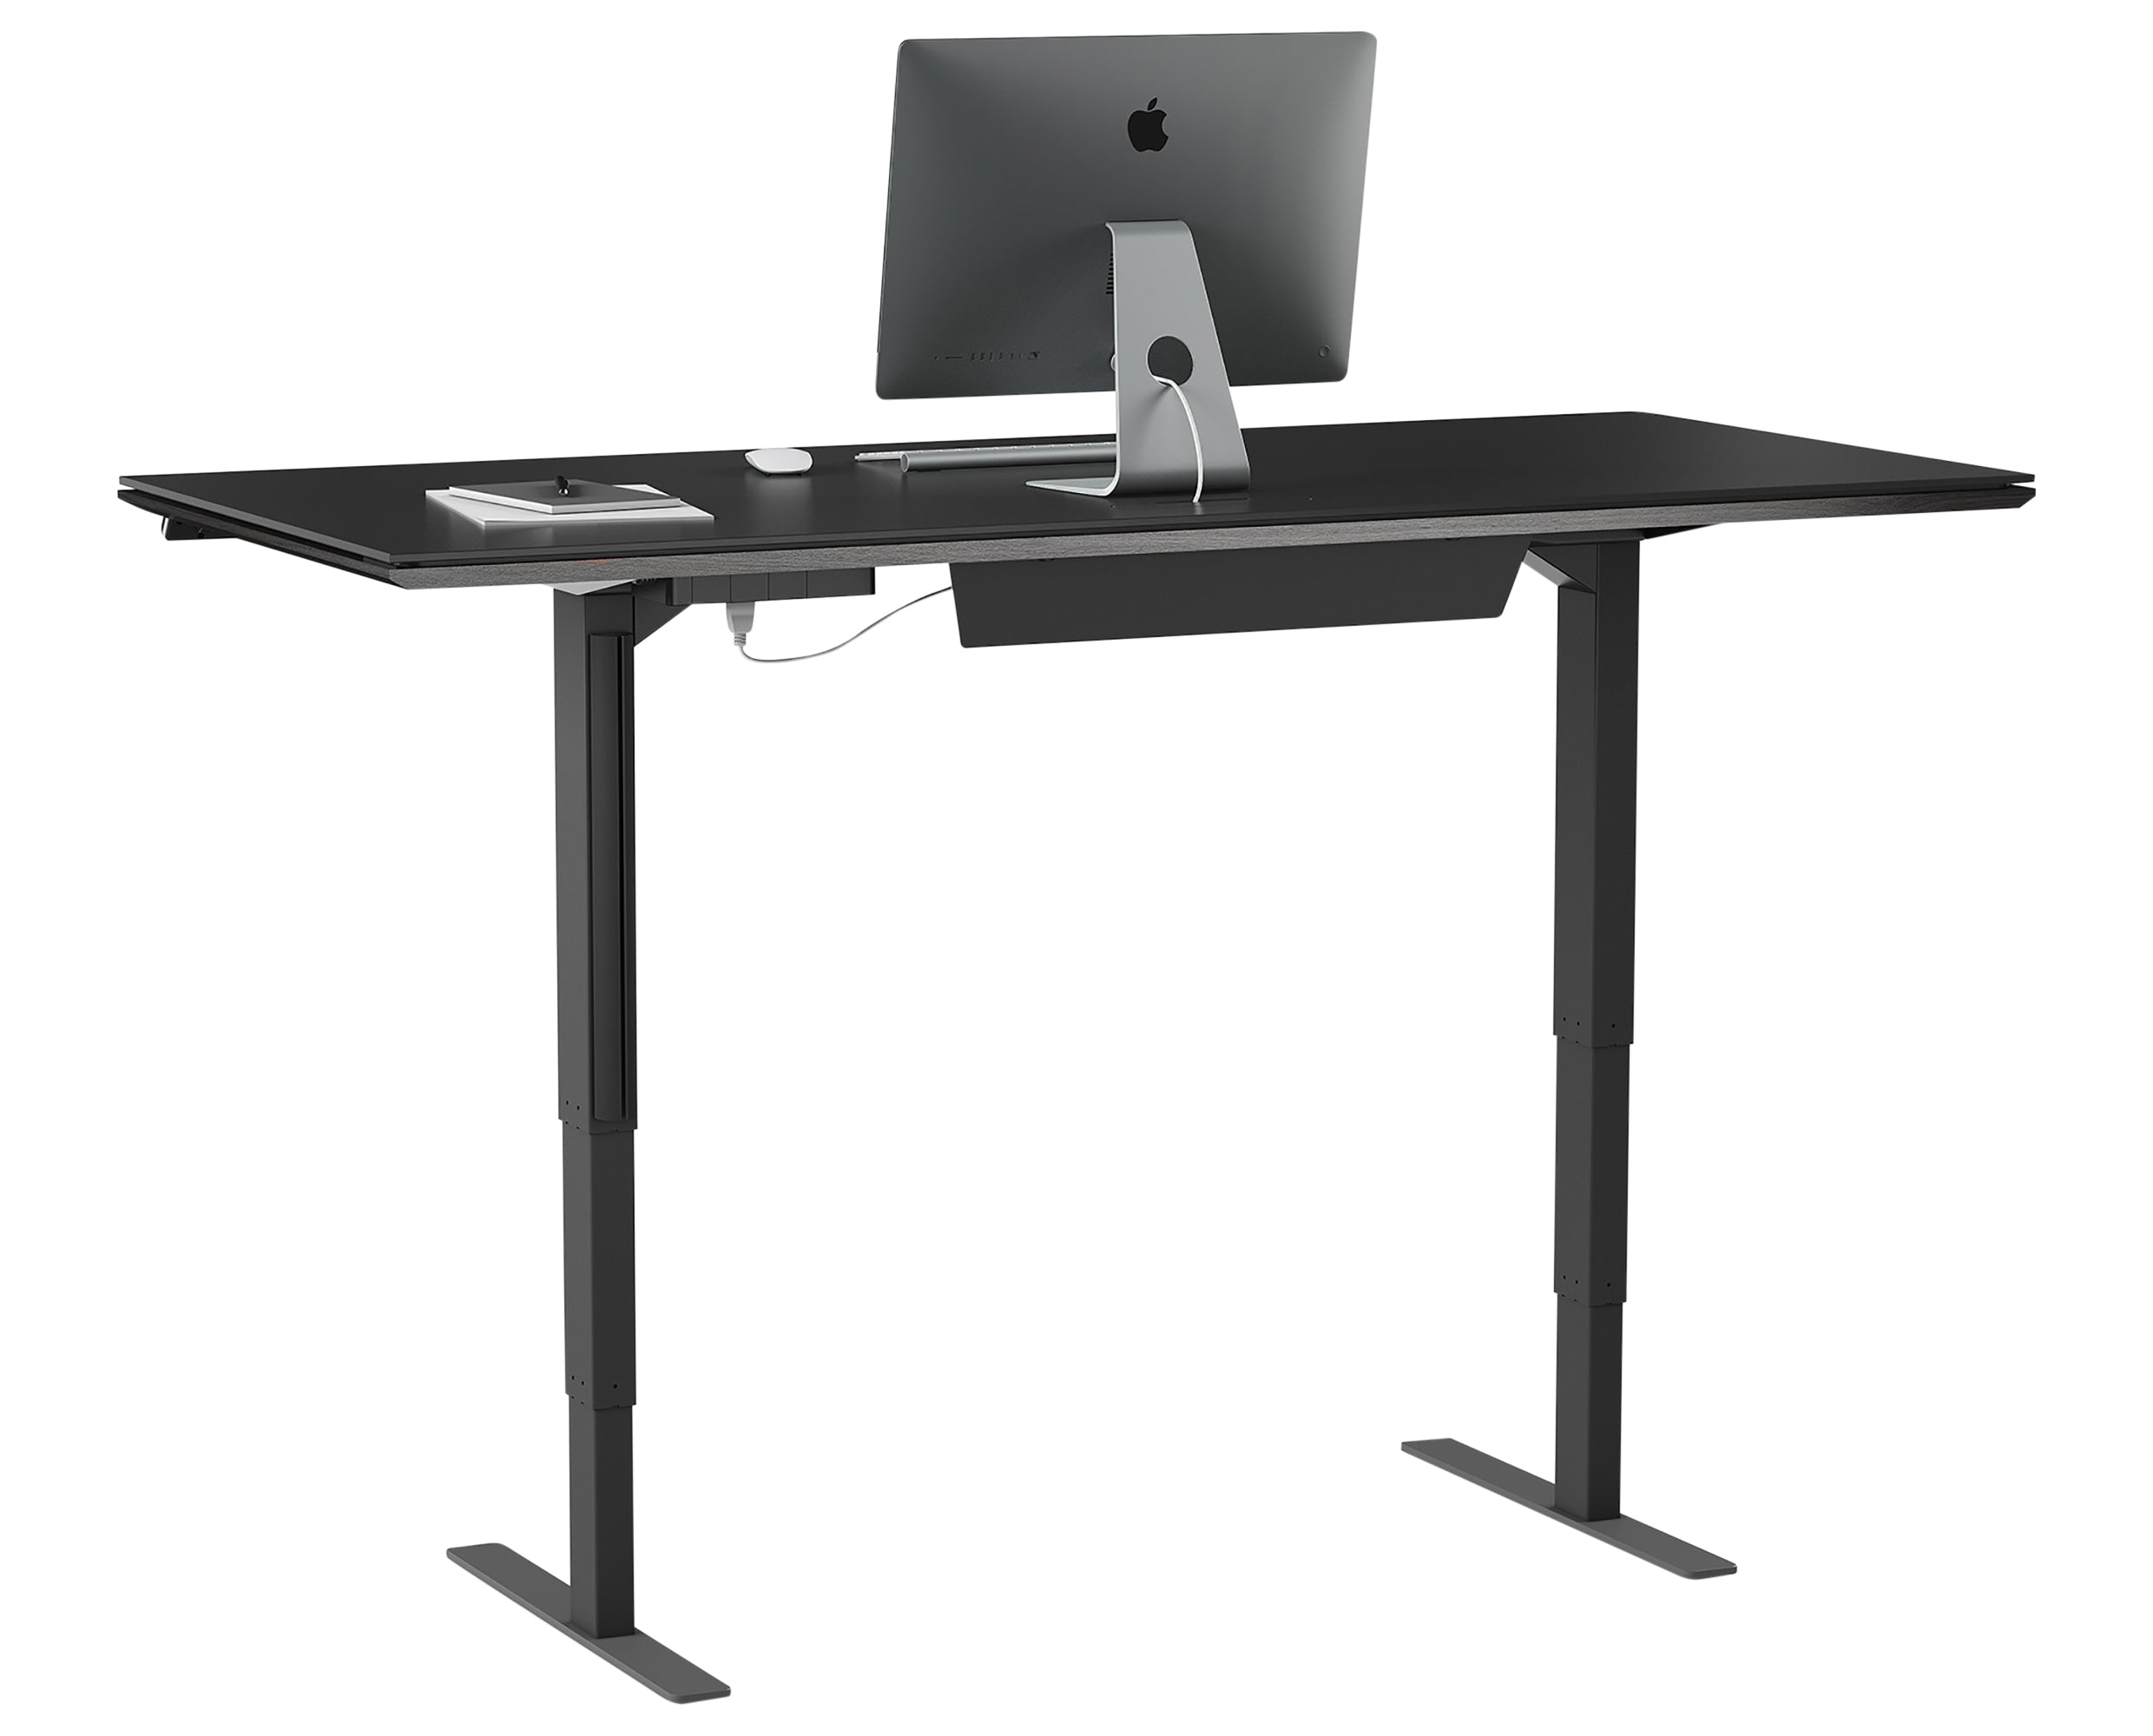 Charcoal Stained Ash & Charcoal Ash Veneer with Black Satin-Etched Glass & Black Steel | BDI Sequel Large Lift Desk | Valley Ridge Furniture